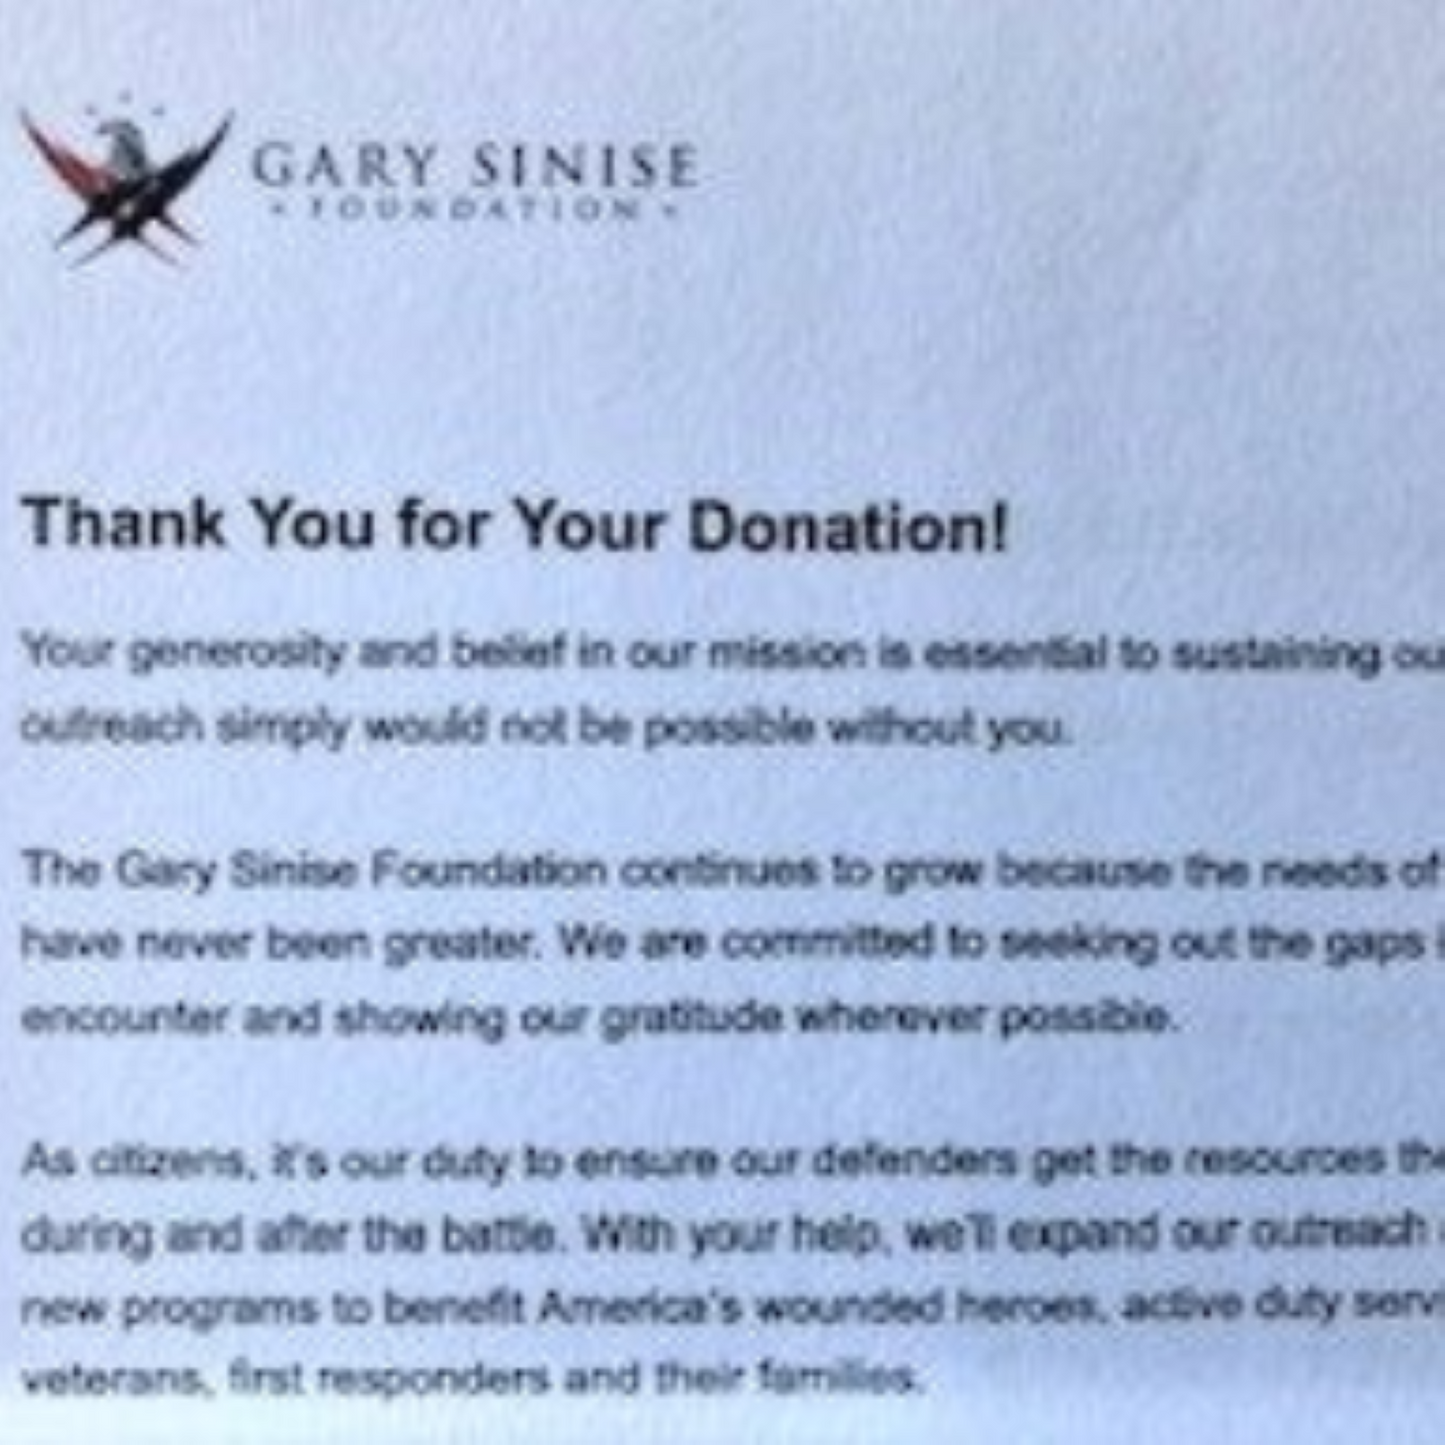 Thank You for Your Donation - from the Gary Sinise Foundation